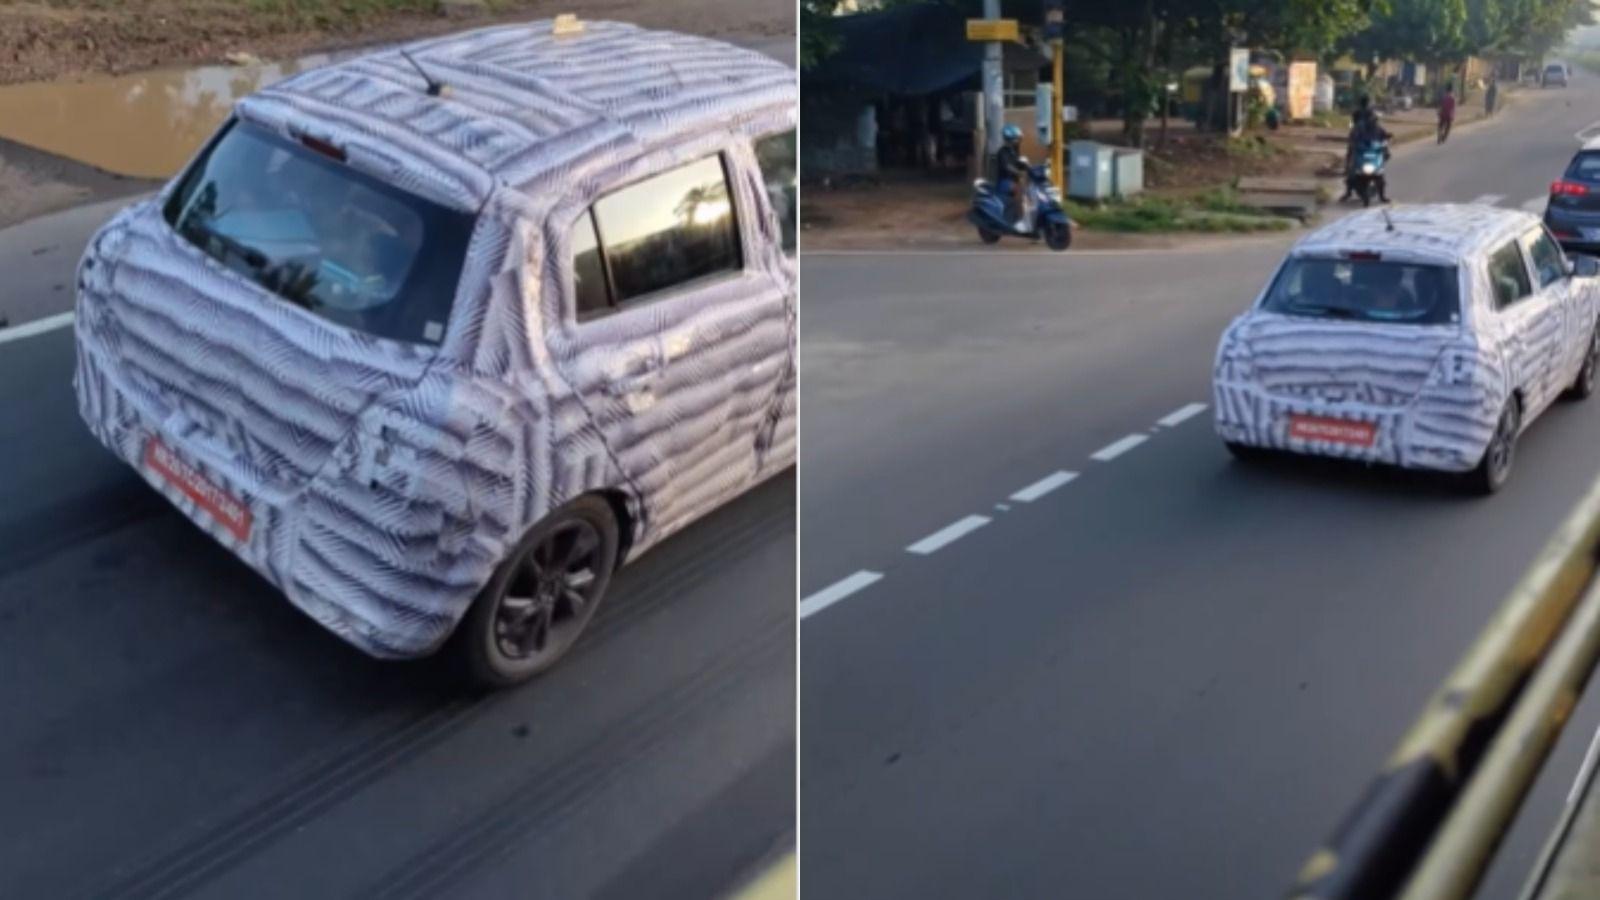 The fourth-generation Maruti Suzuki Swift is expected to launch in India in 2024 and the latest spy shots show more details on the upcoming offering.